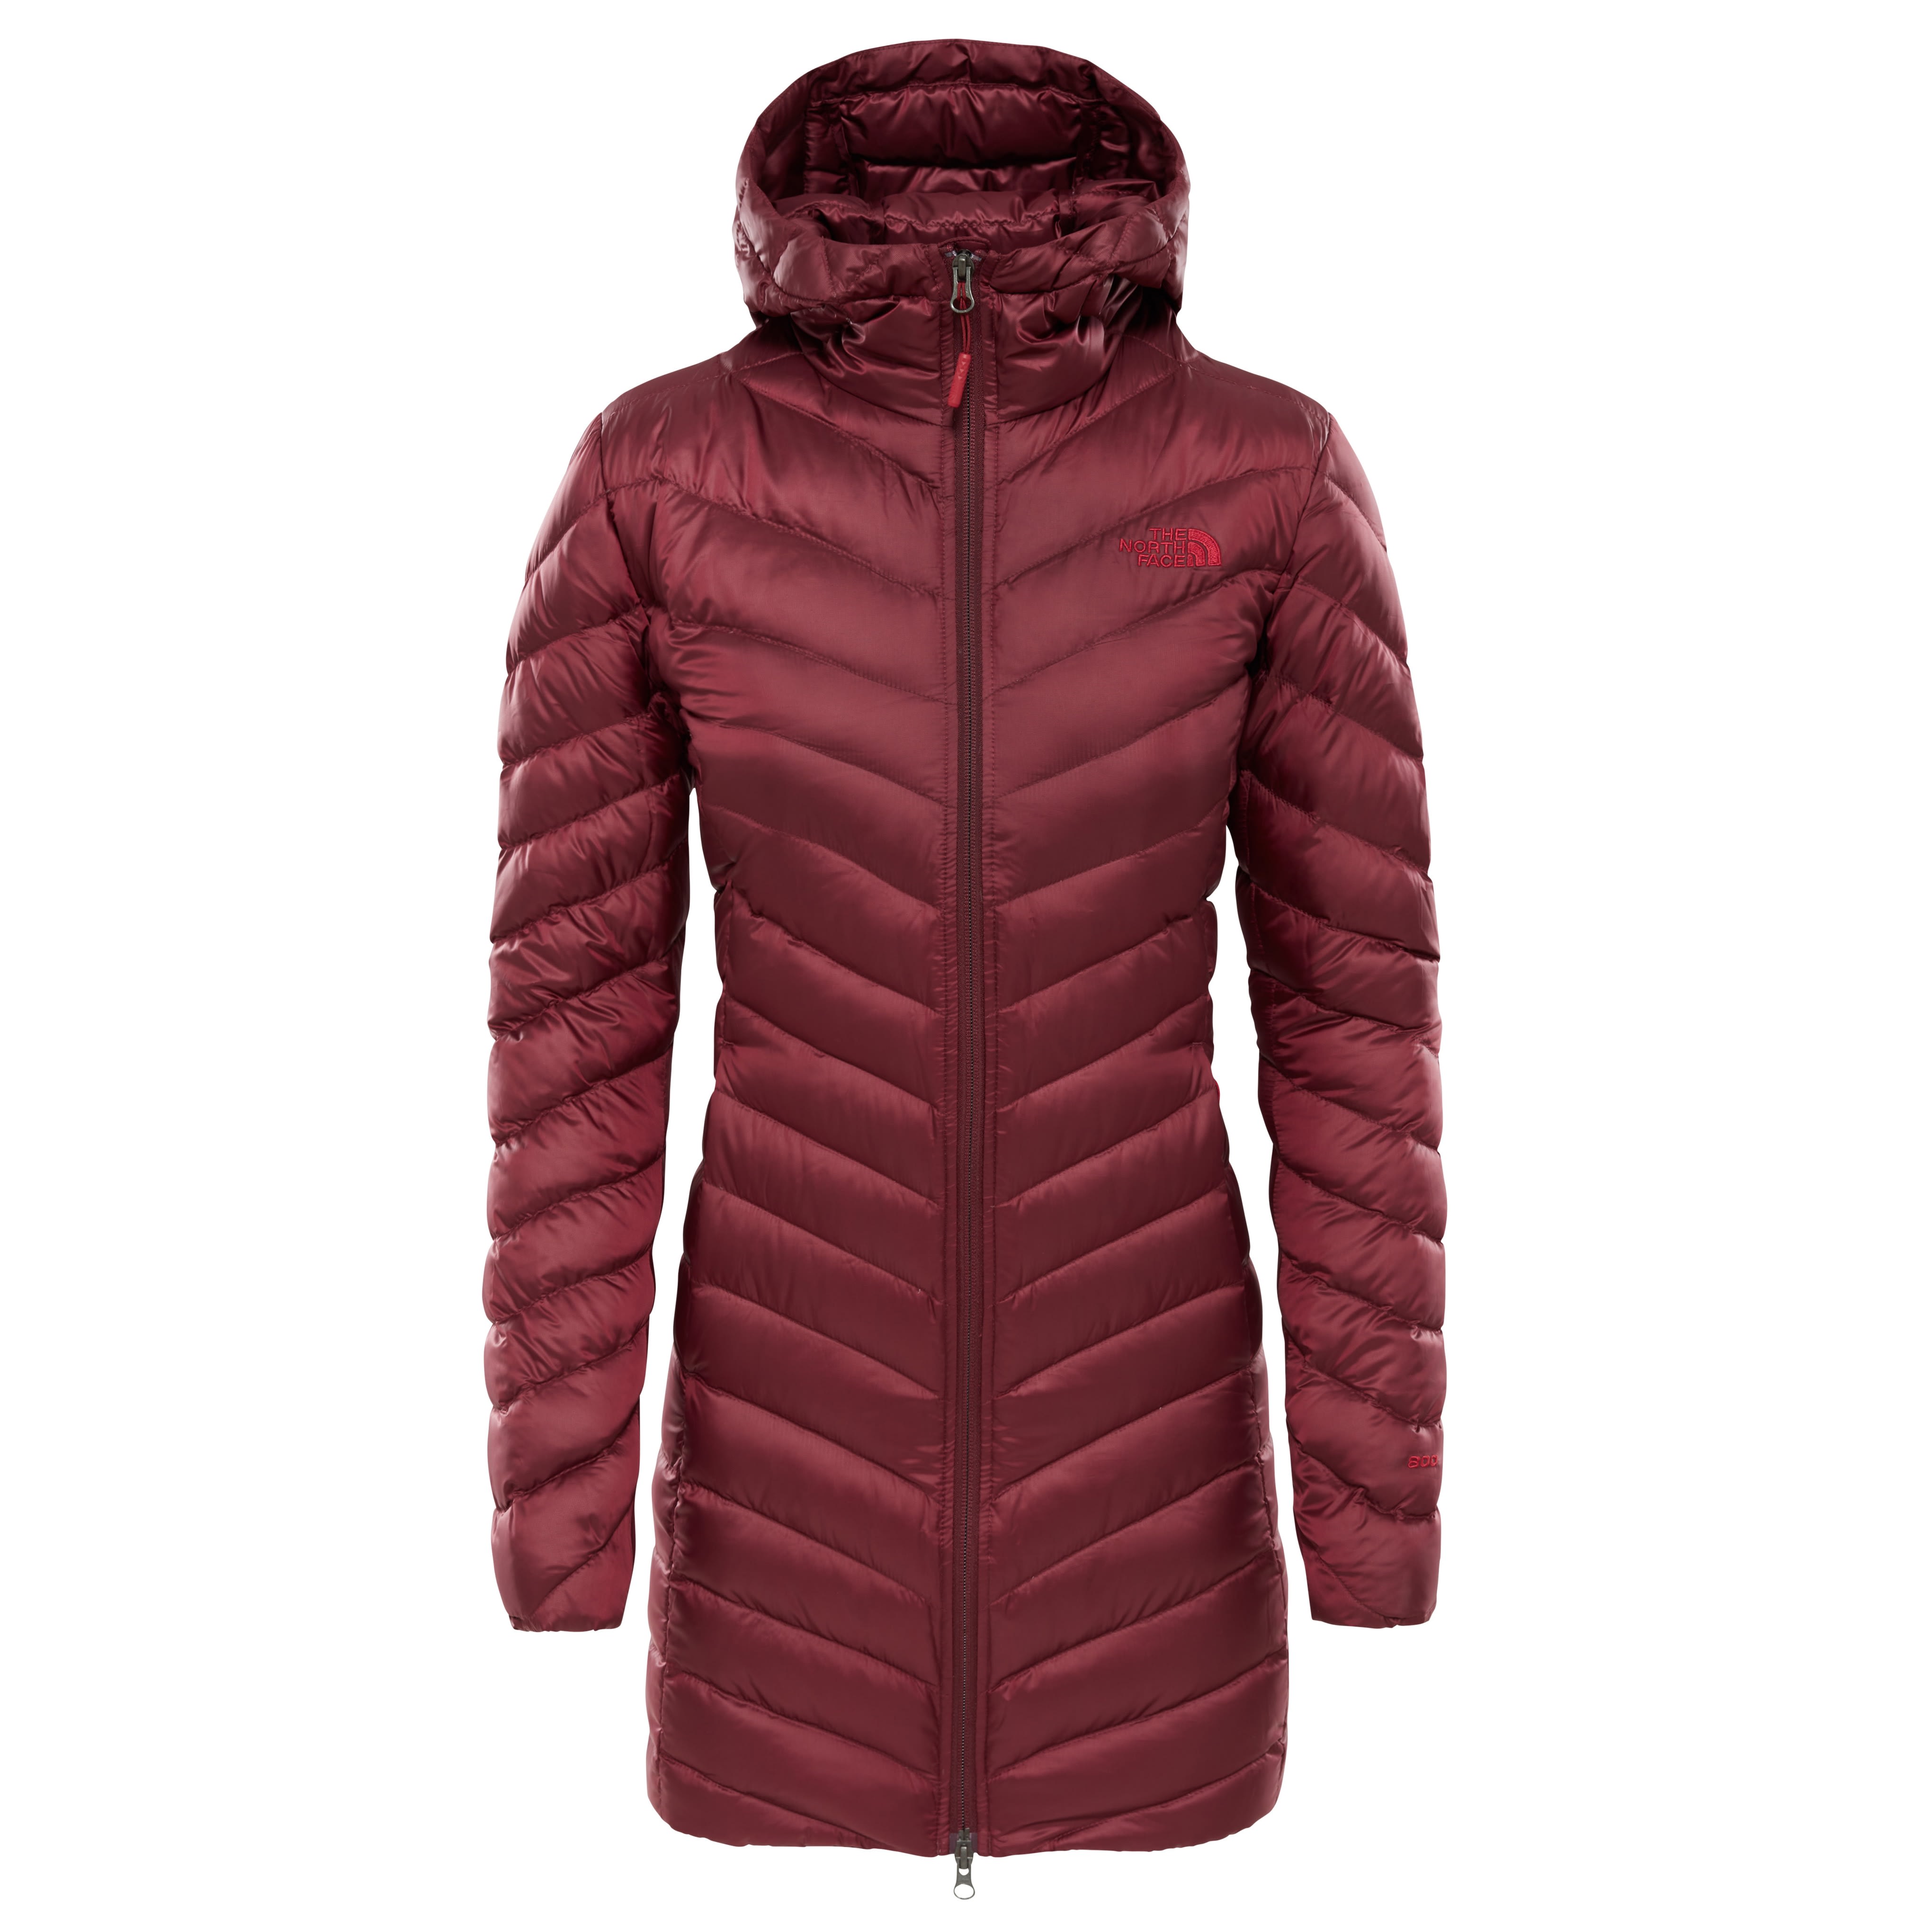 KjÃ¸p The North Face Women's Trevail Parka fra Outnorth